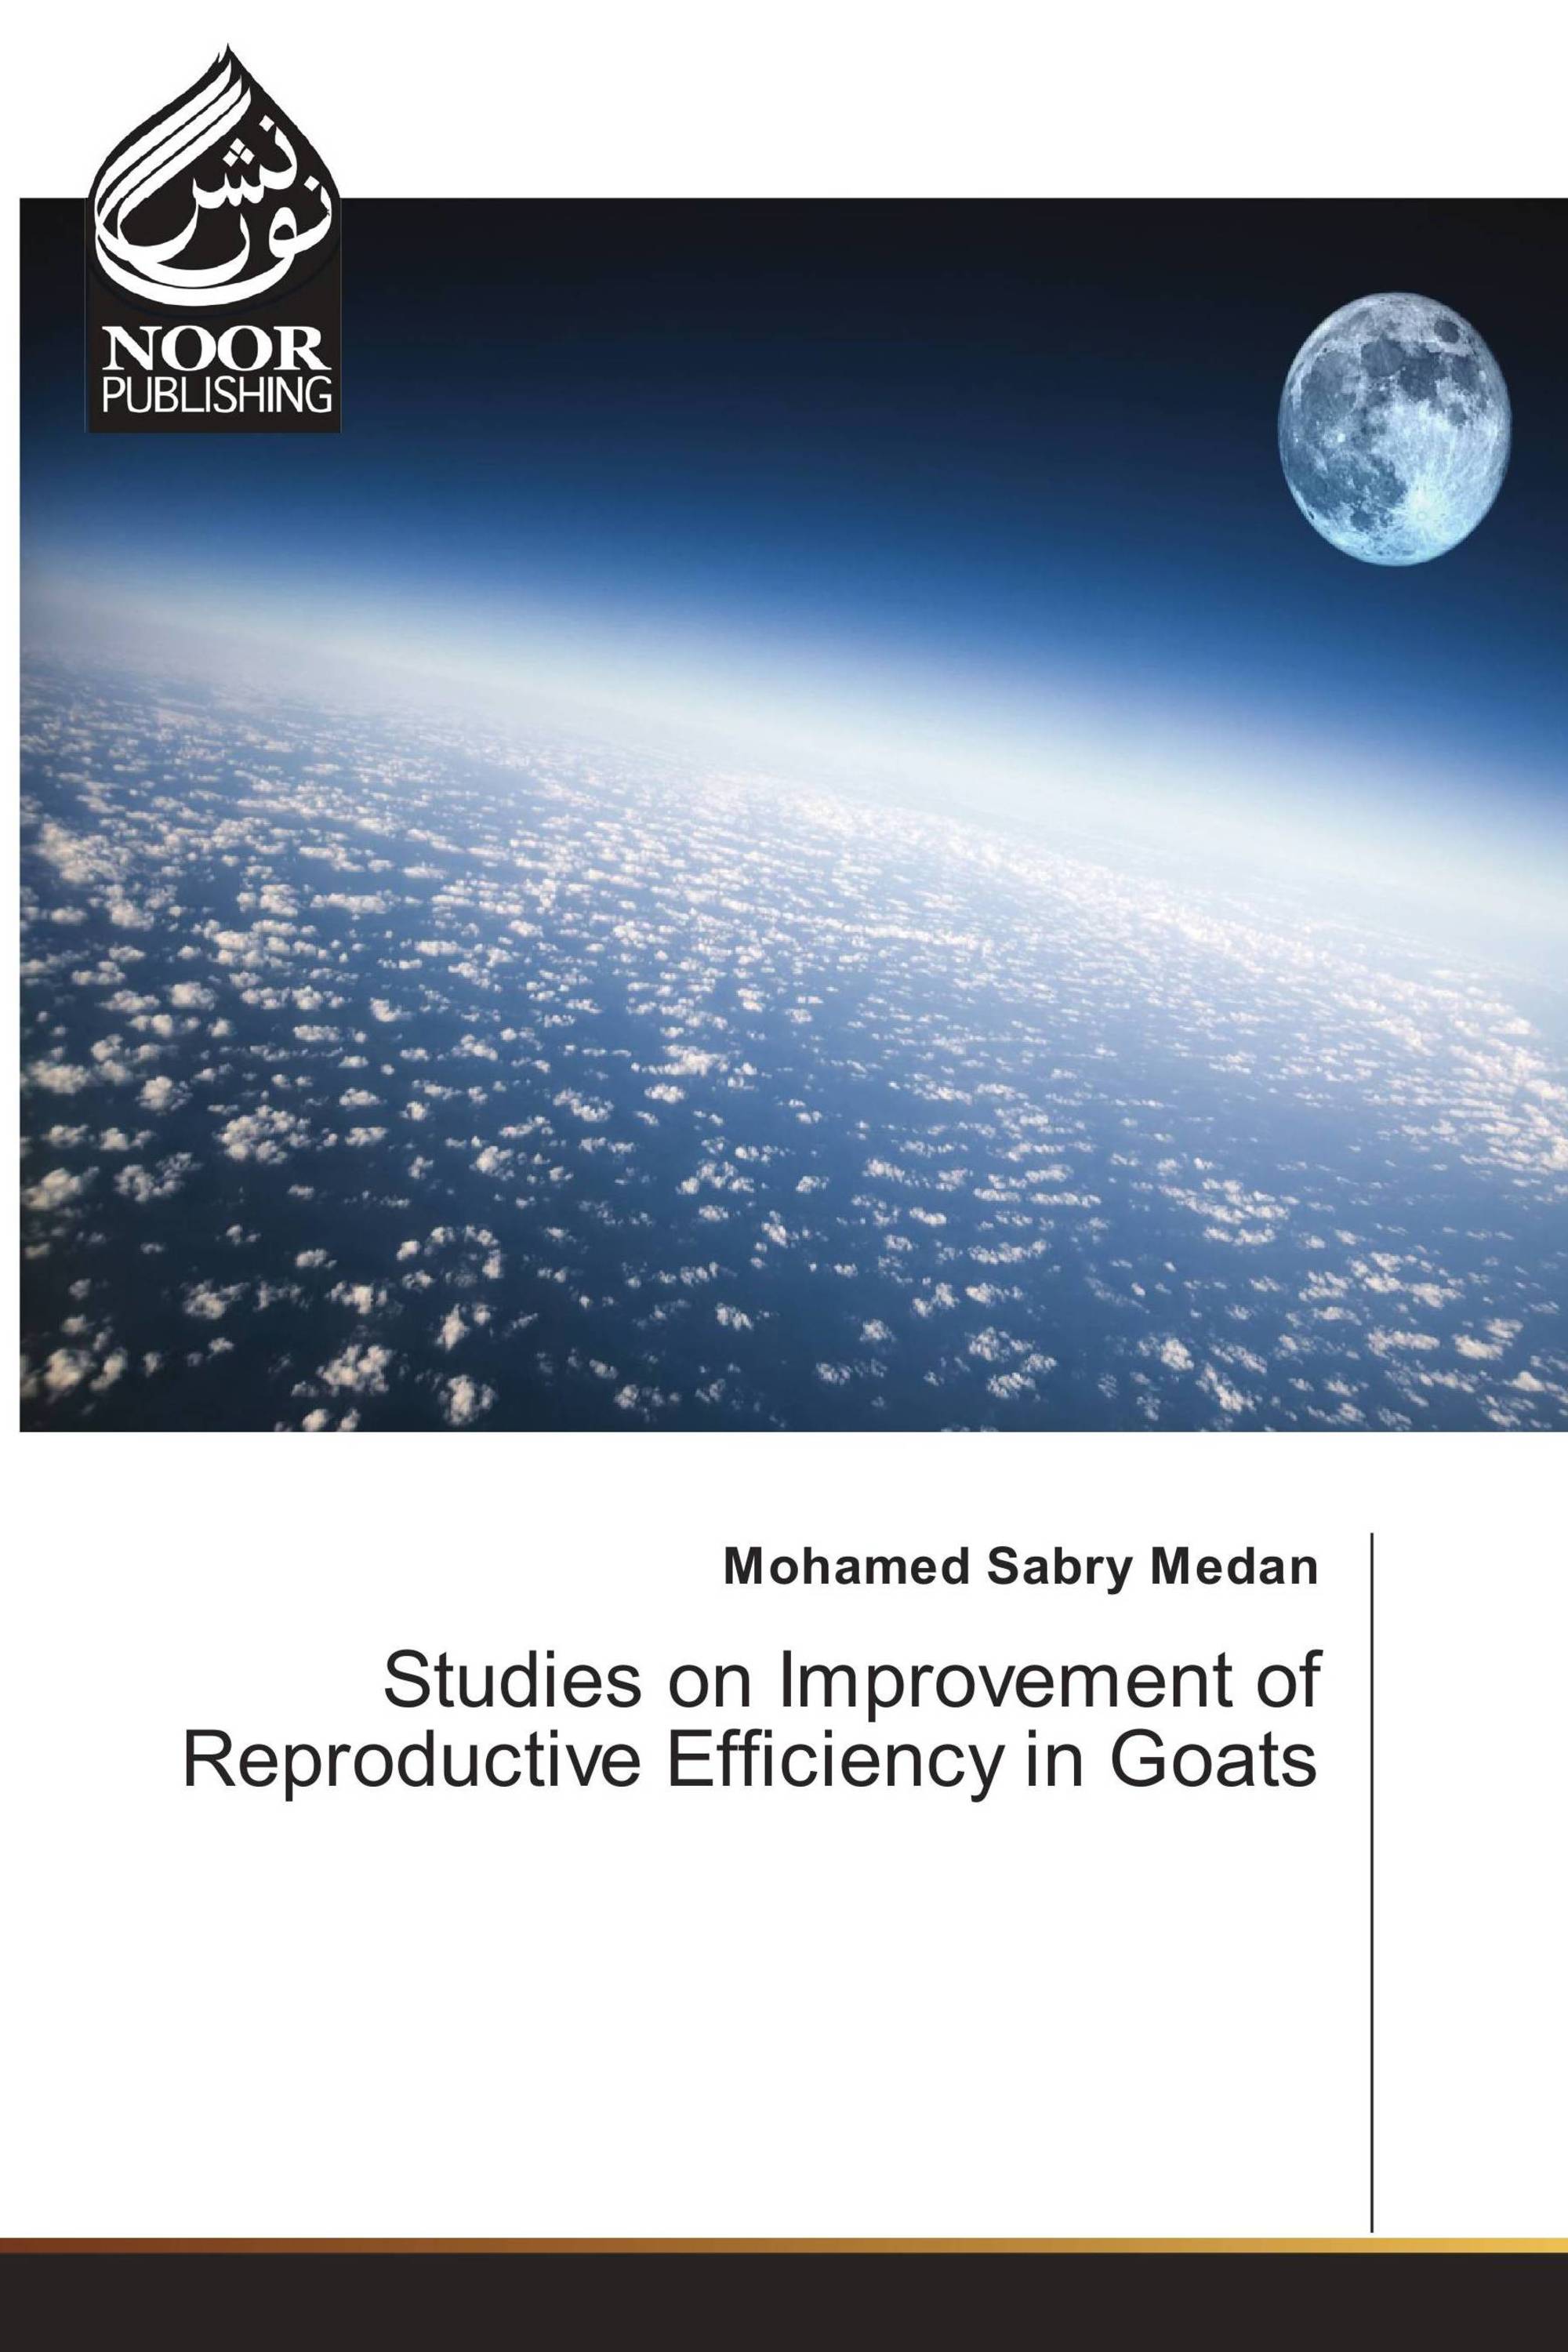 Studies on Improvement of Reproductive Efficiency in Goats